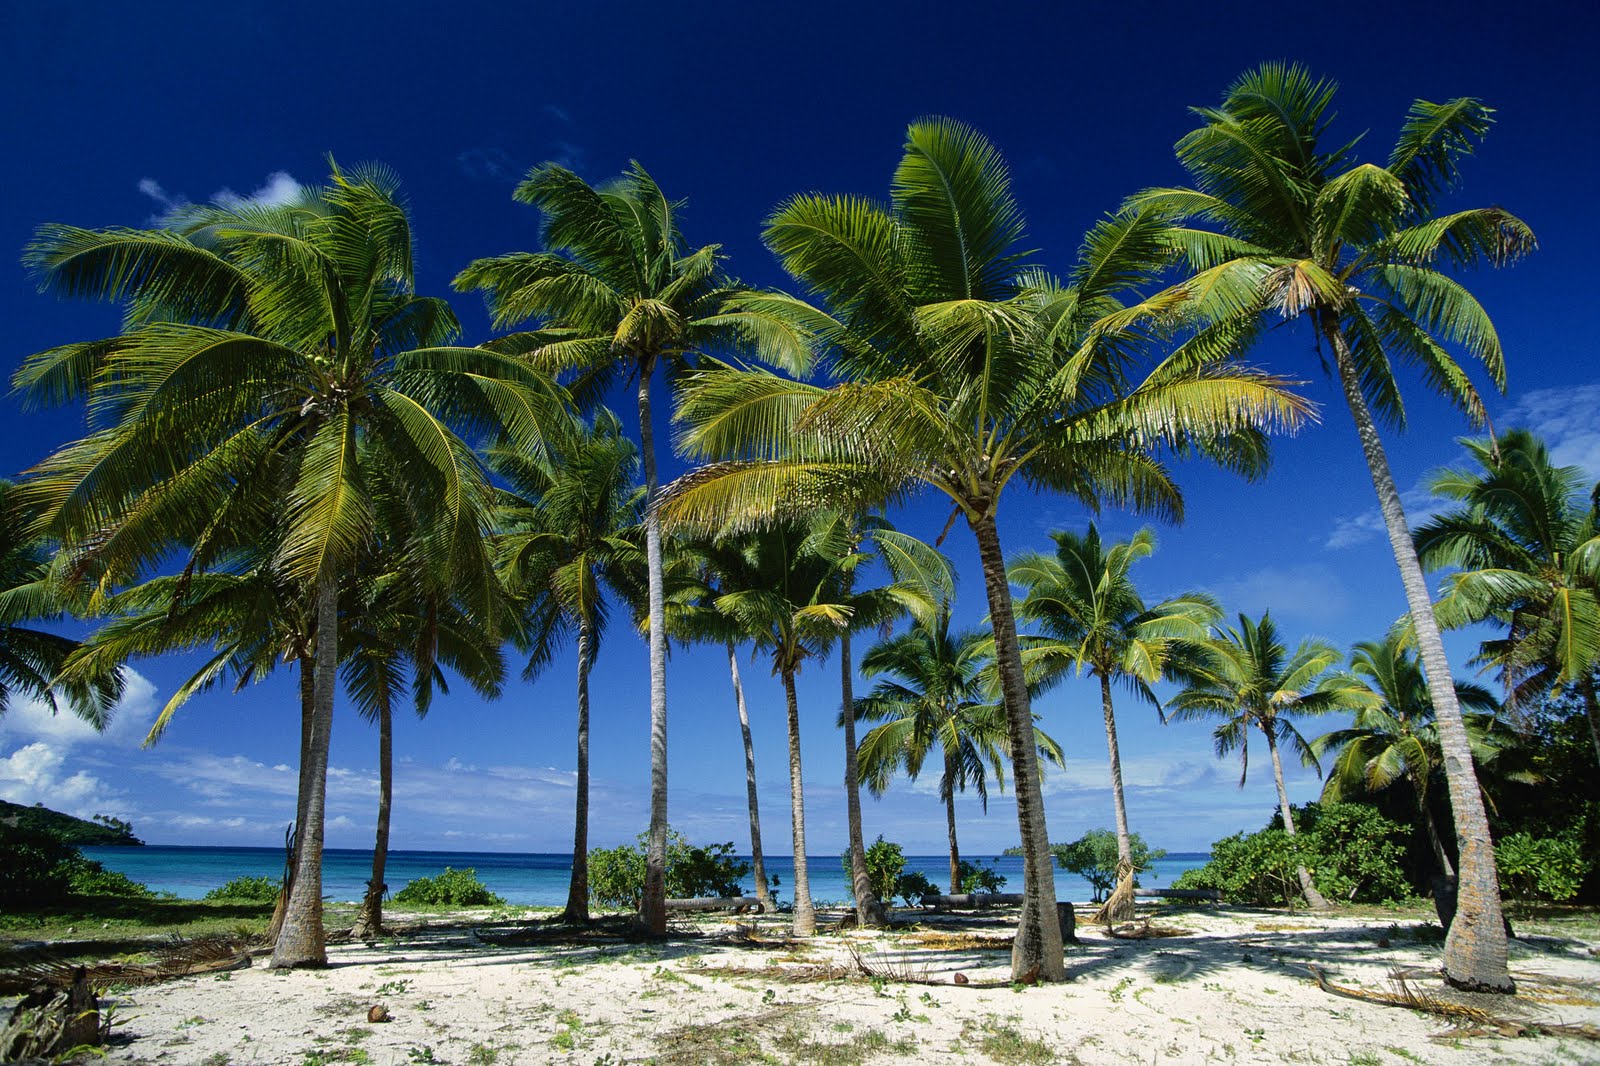 Tropical Landscape With Palm Trees HD Wallpaper The